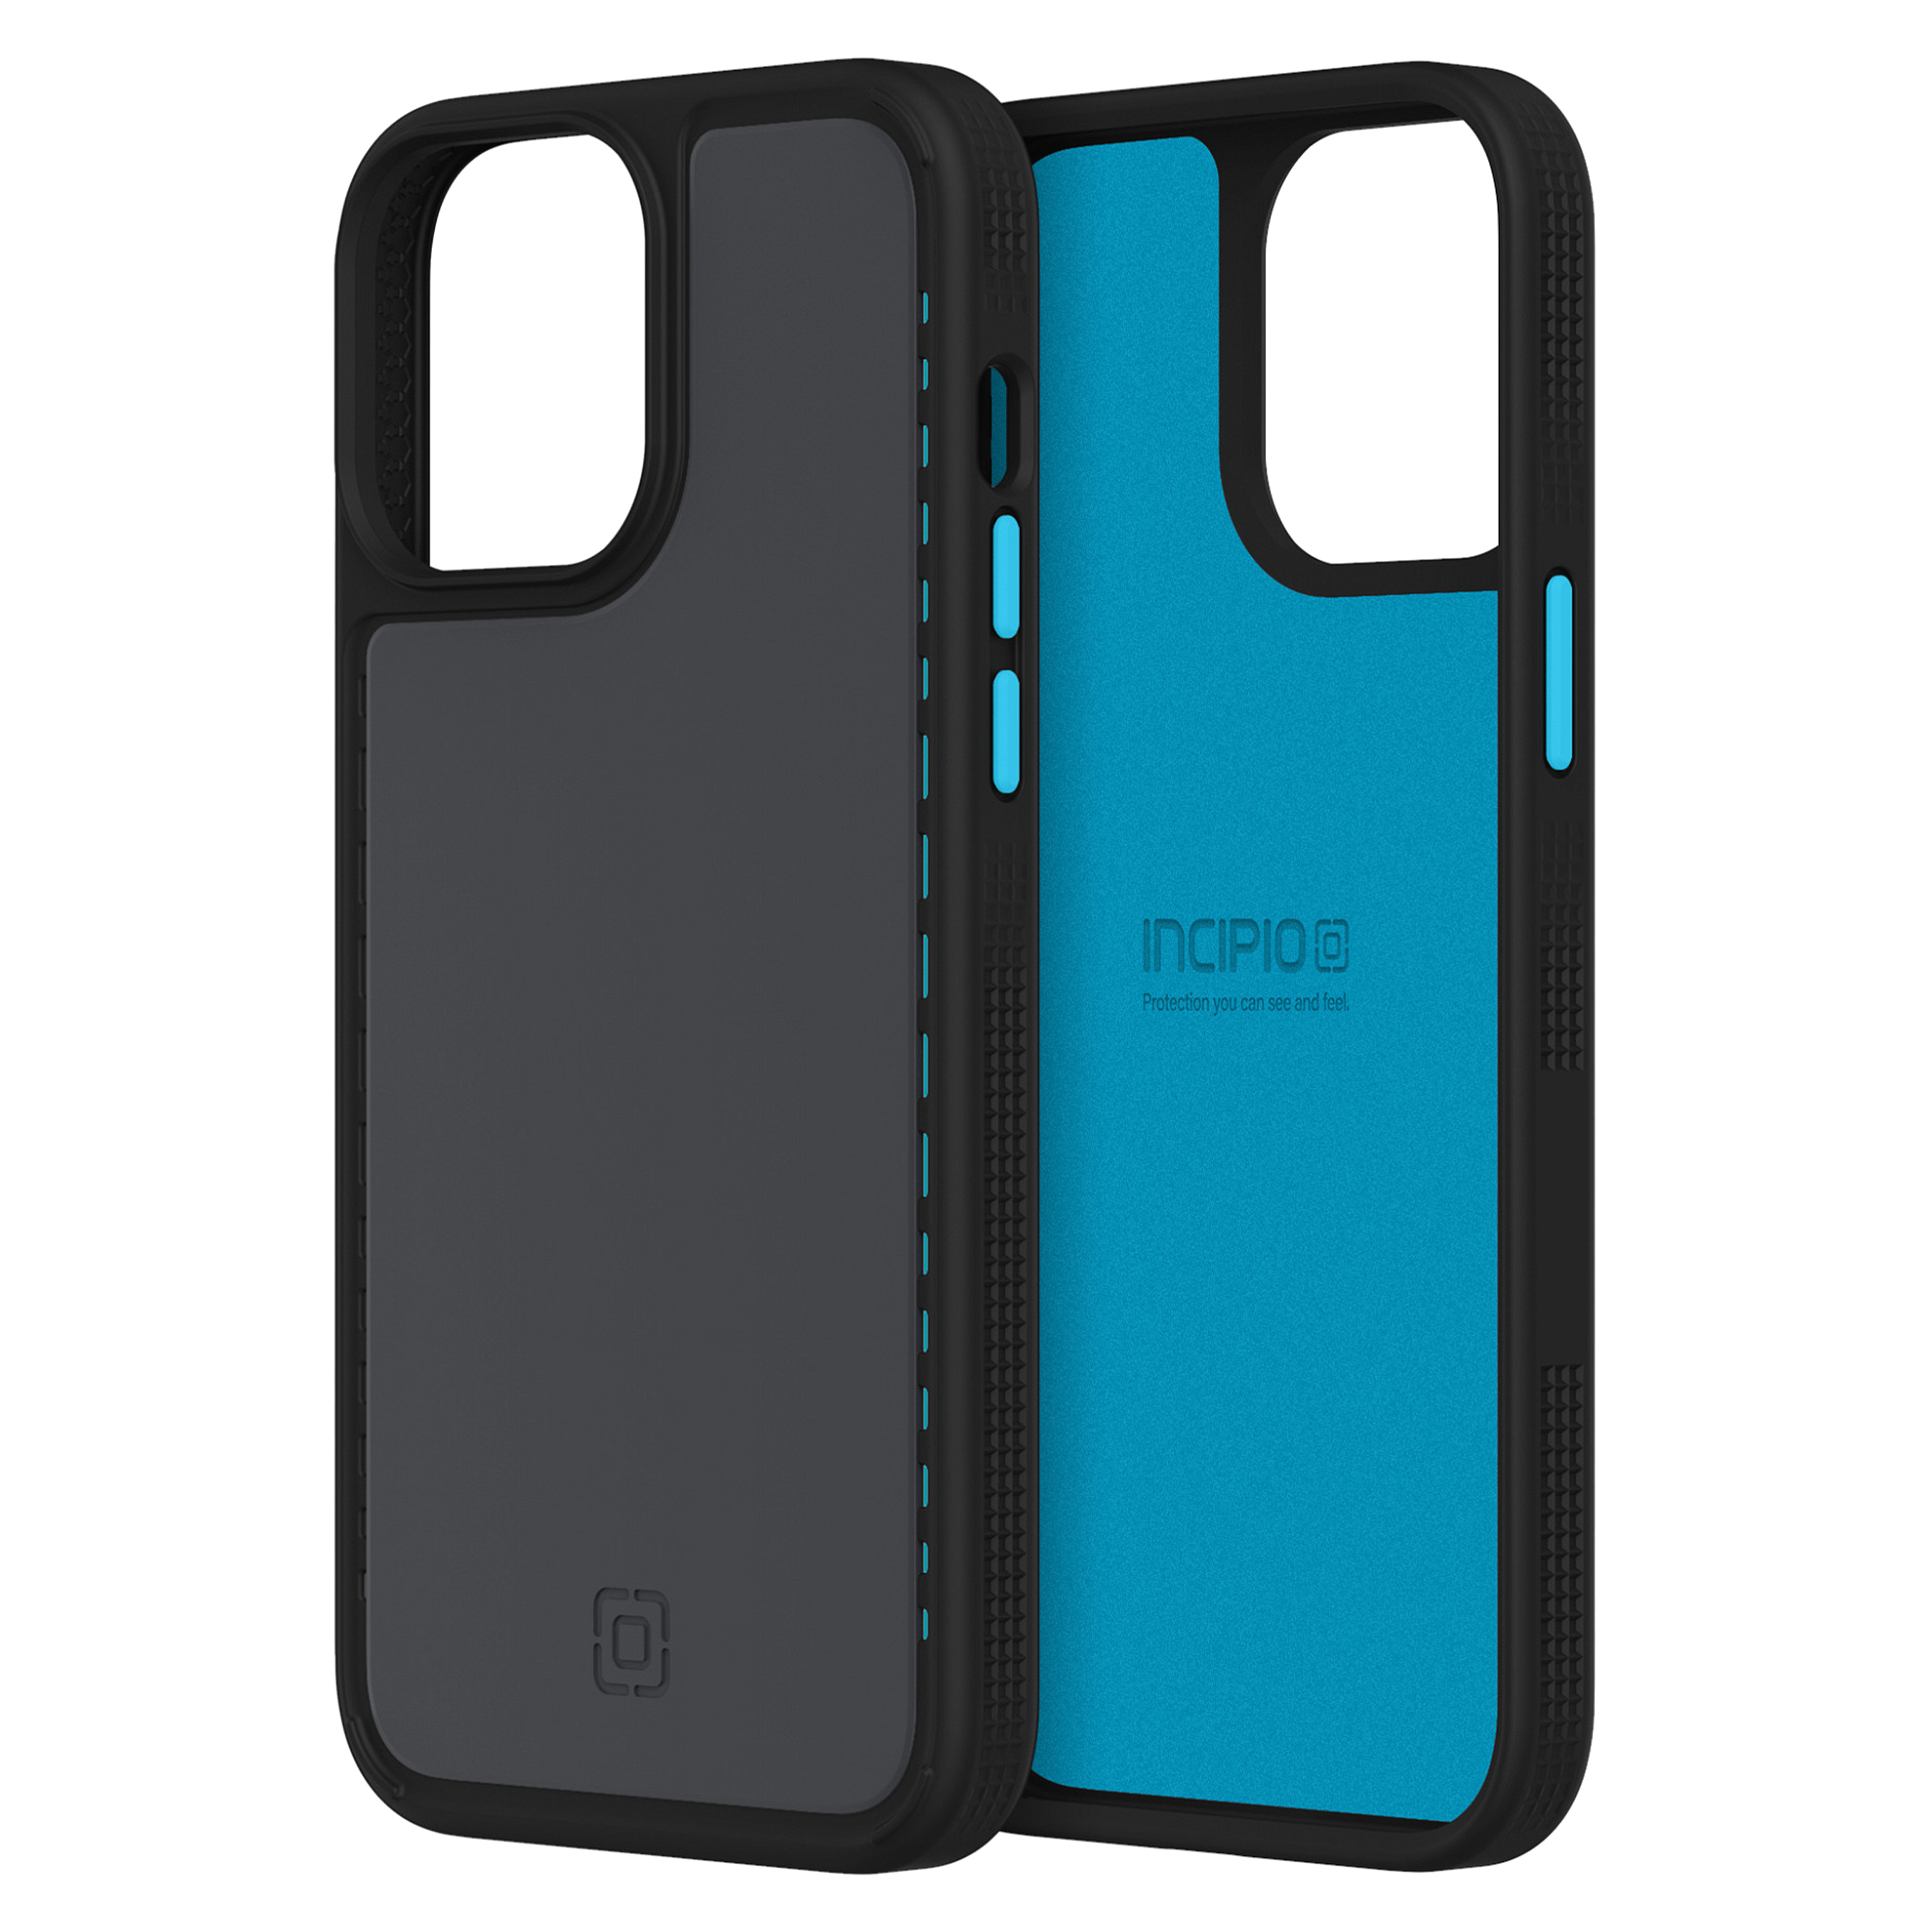 Incipio - Optum Case - iPhone 13 Pro Max / 12 Pro Max - Black Oyster And Electric Blue